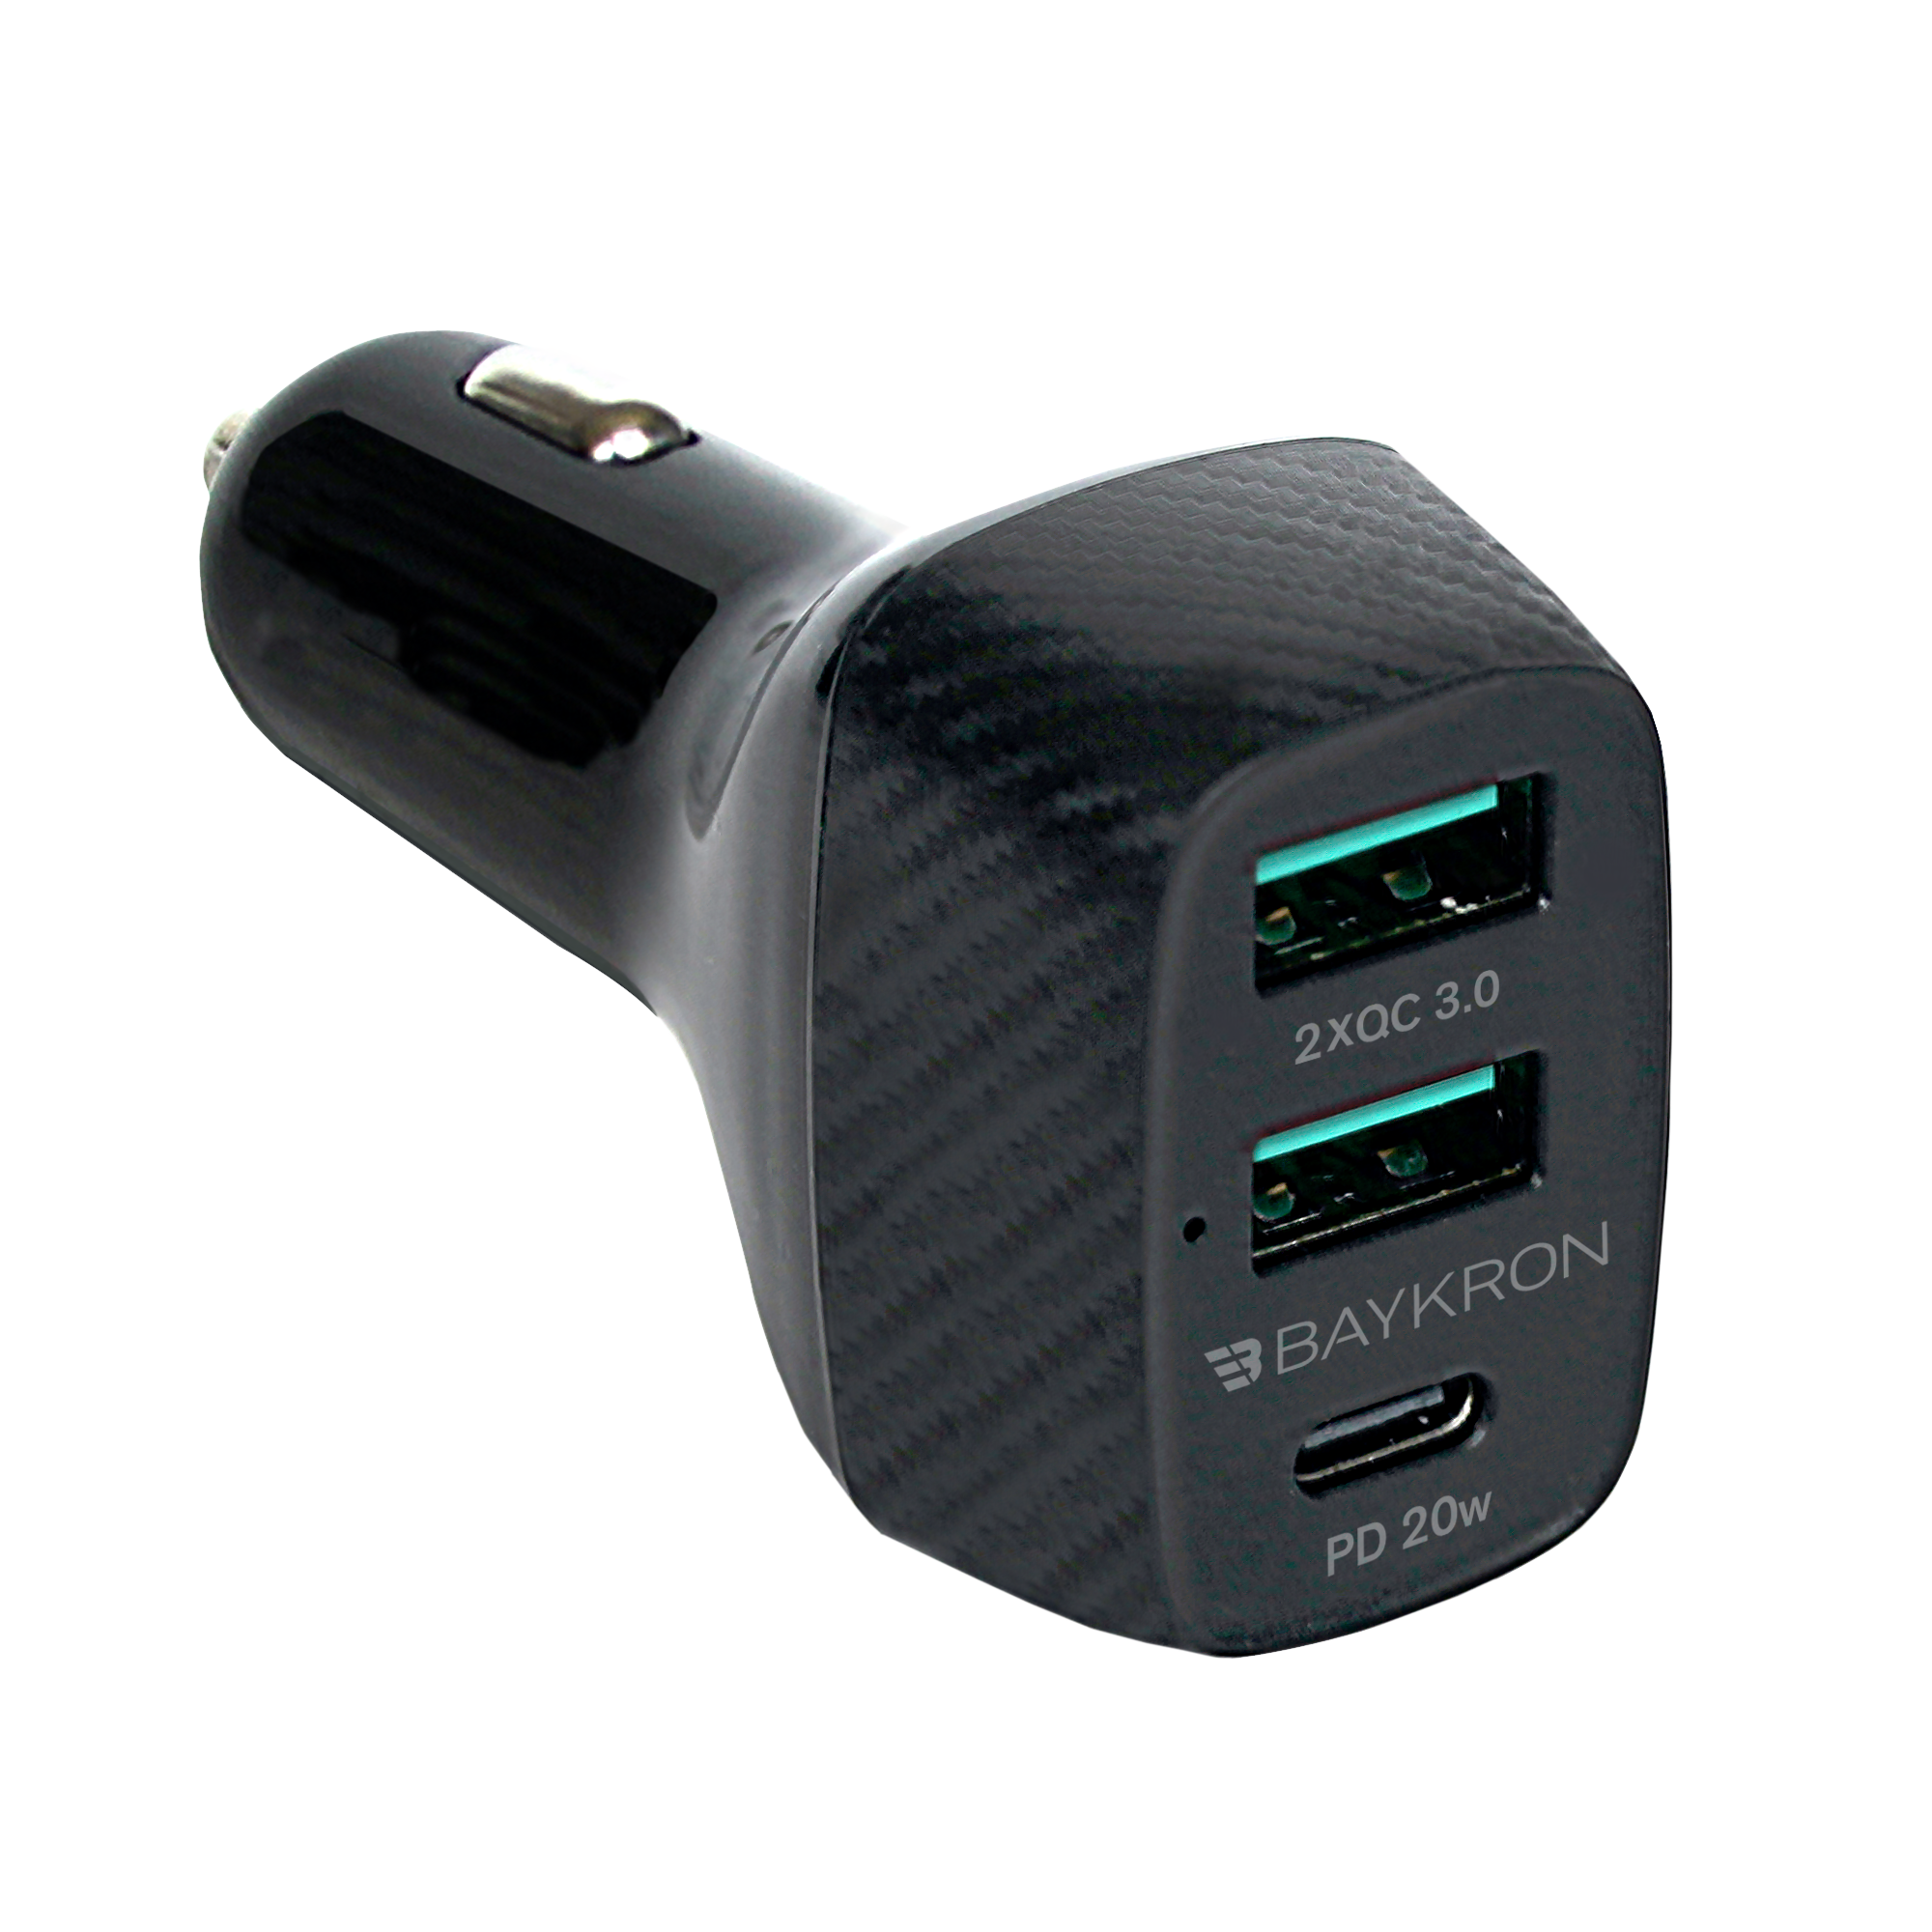 Baykron Car Charger with USB 3.0 A + USB 2.1 A, and USB Type-C™ Power Delivery 20W